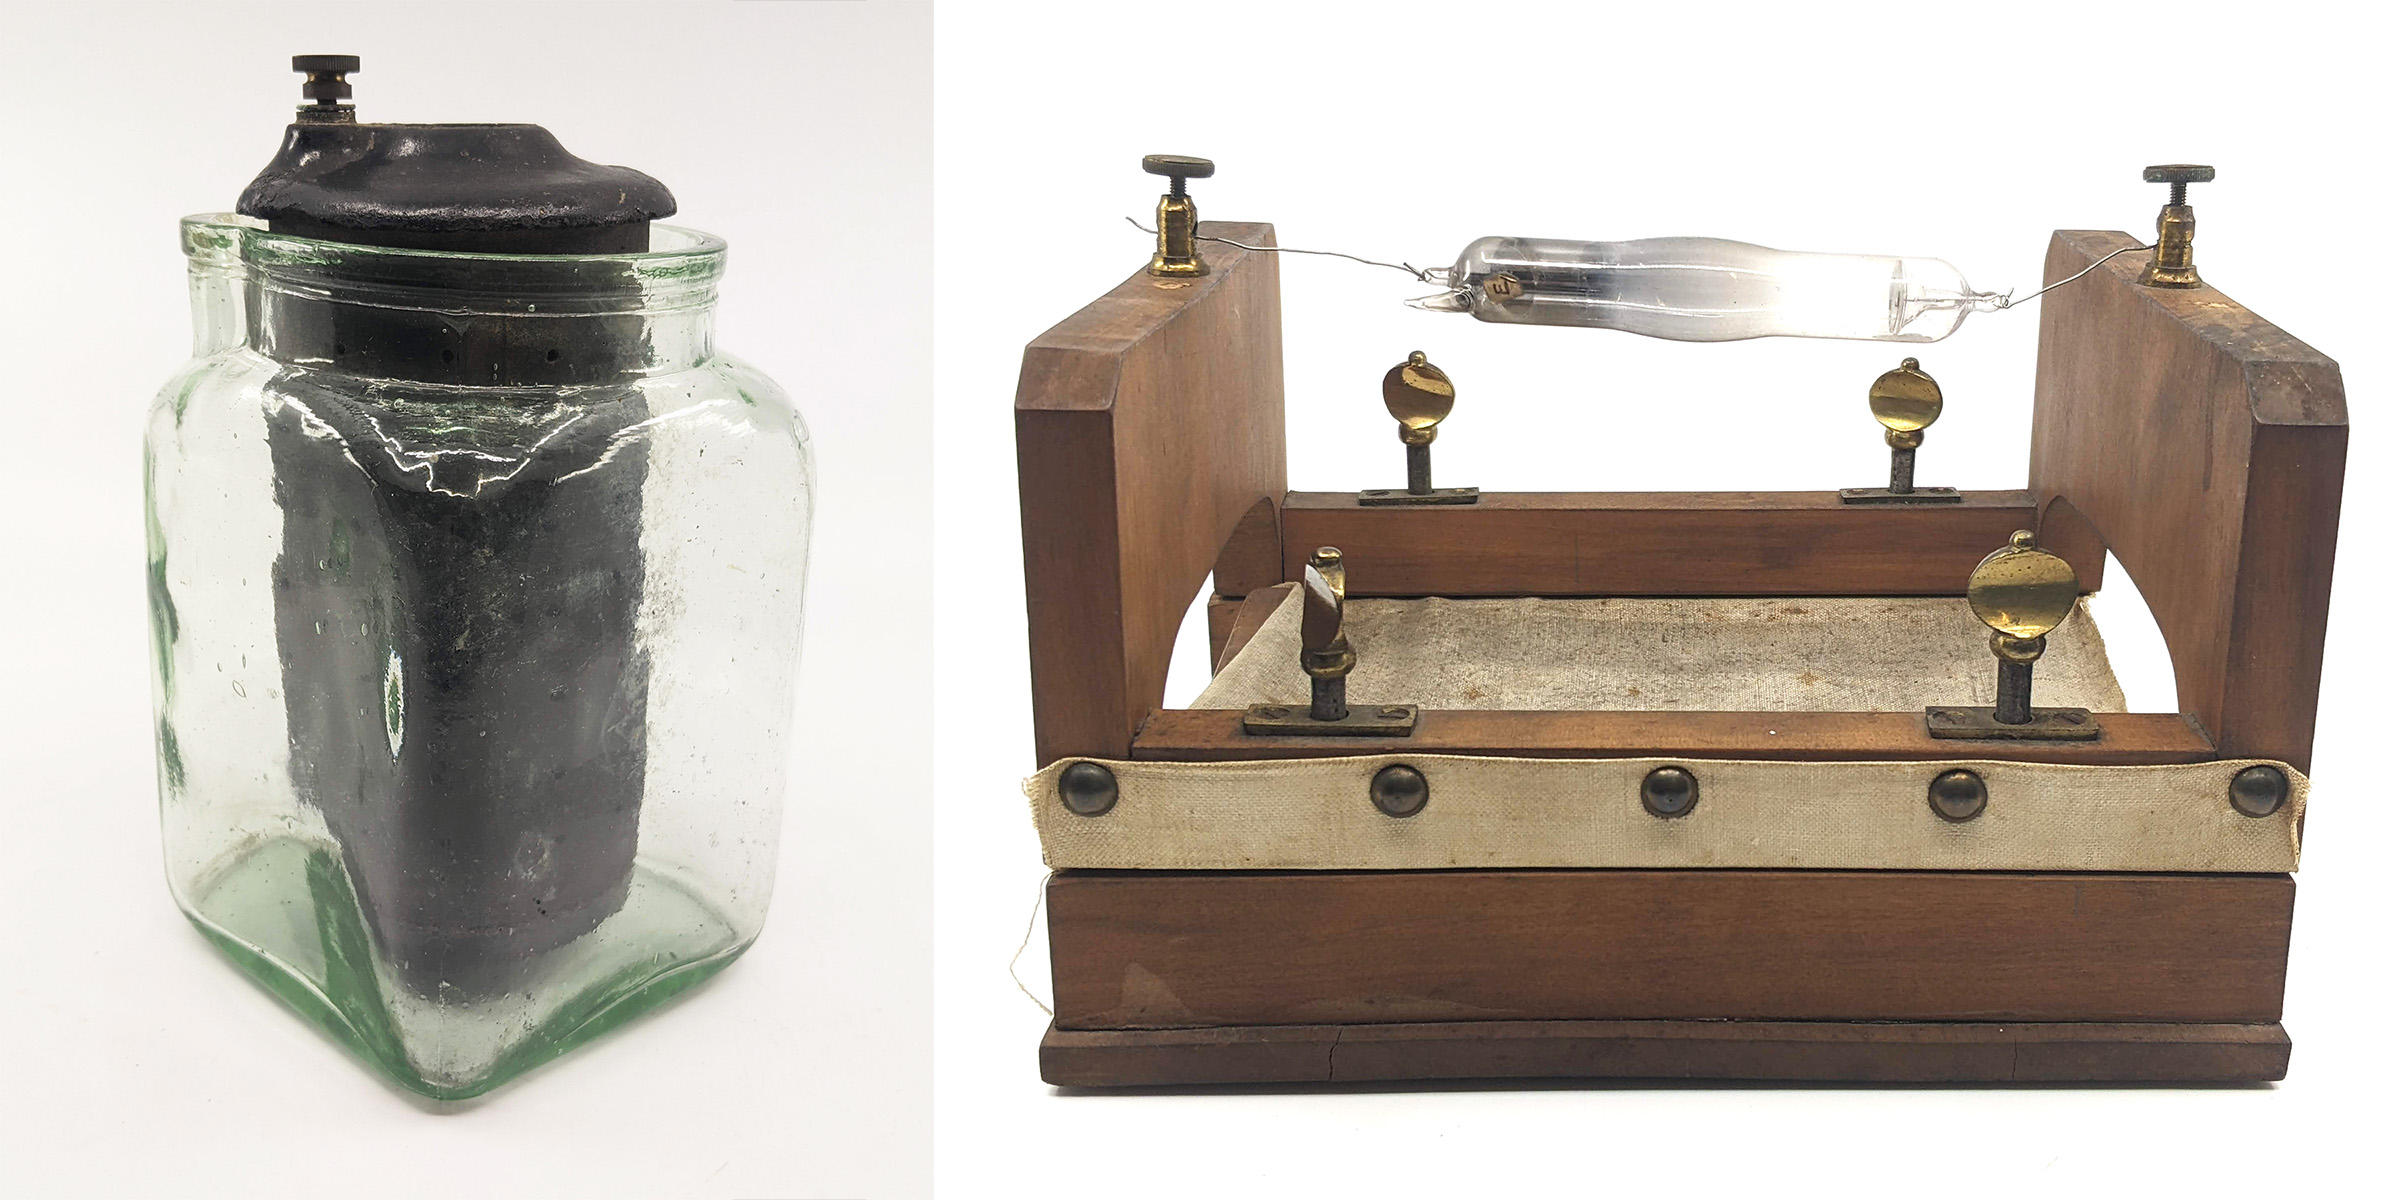 One of three batteries; the vacuum tube and sling, c. 1896. Collection of the Marks-Hirschfeld Museum of Medical History.